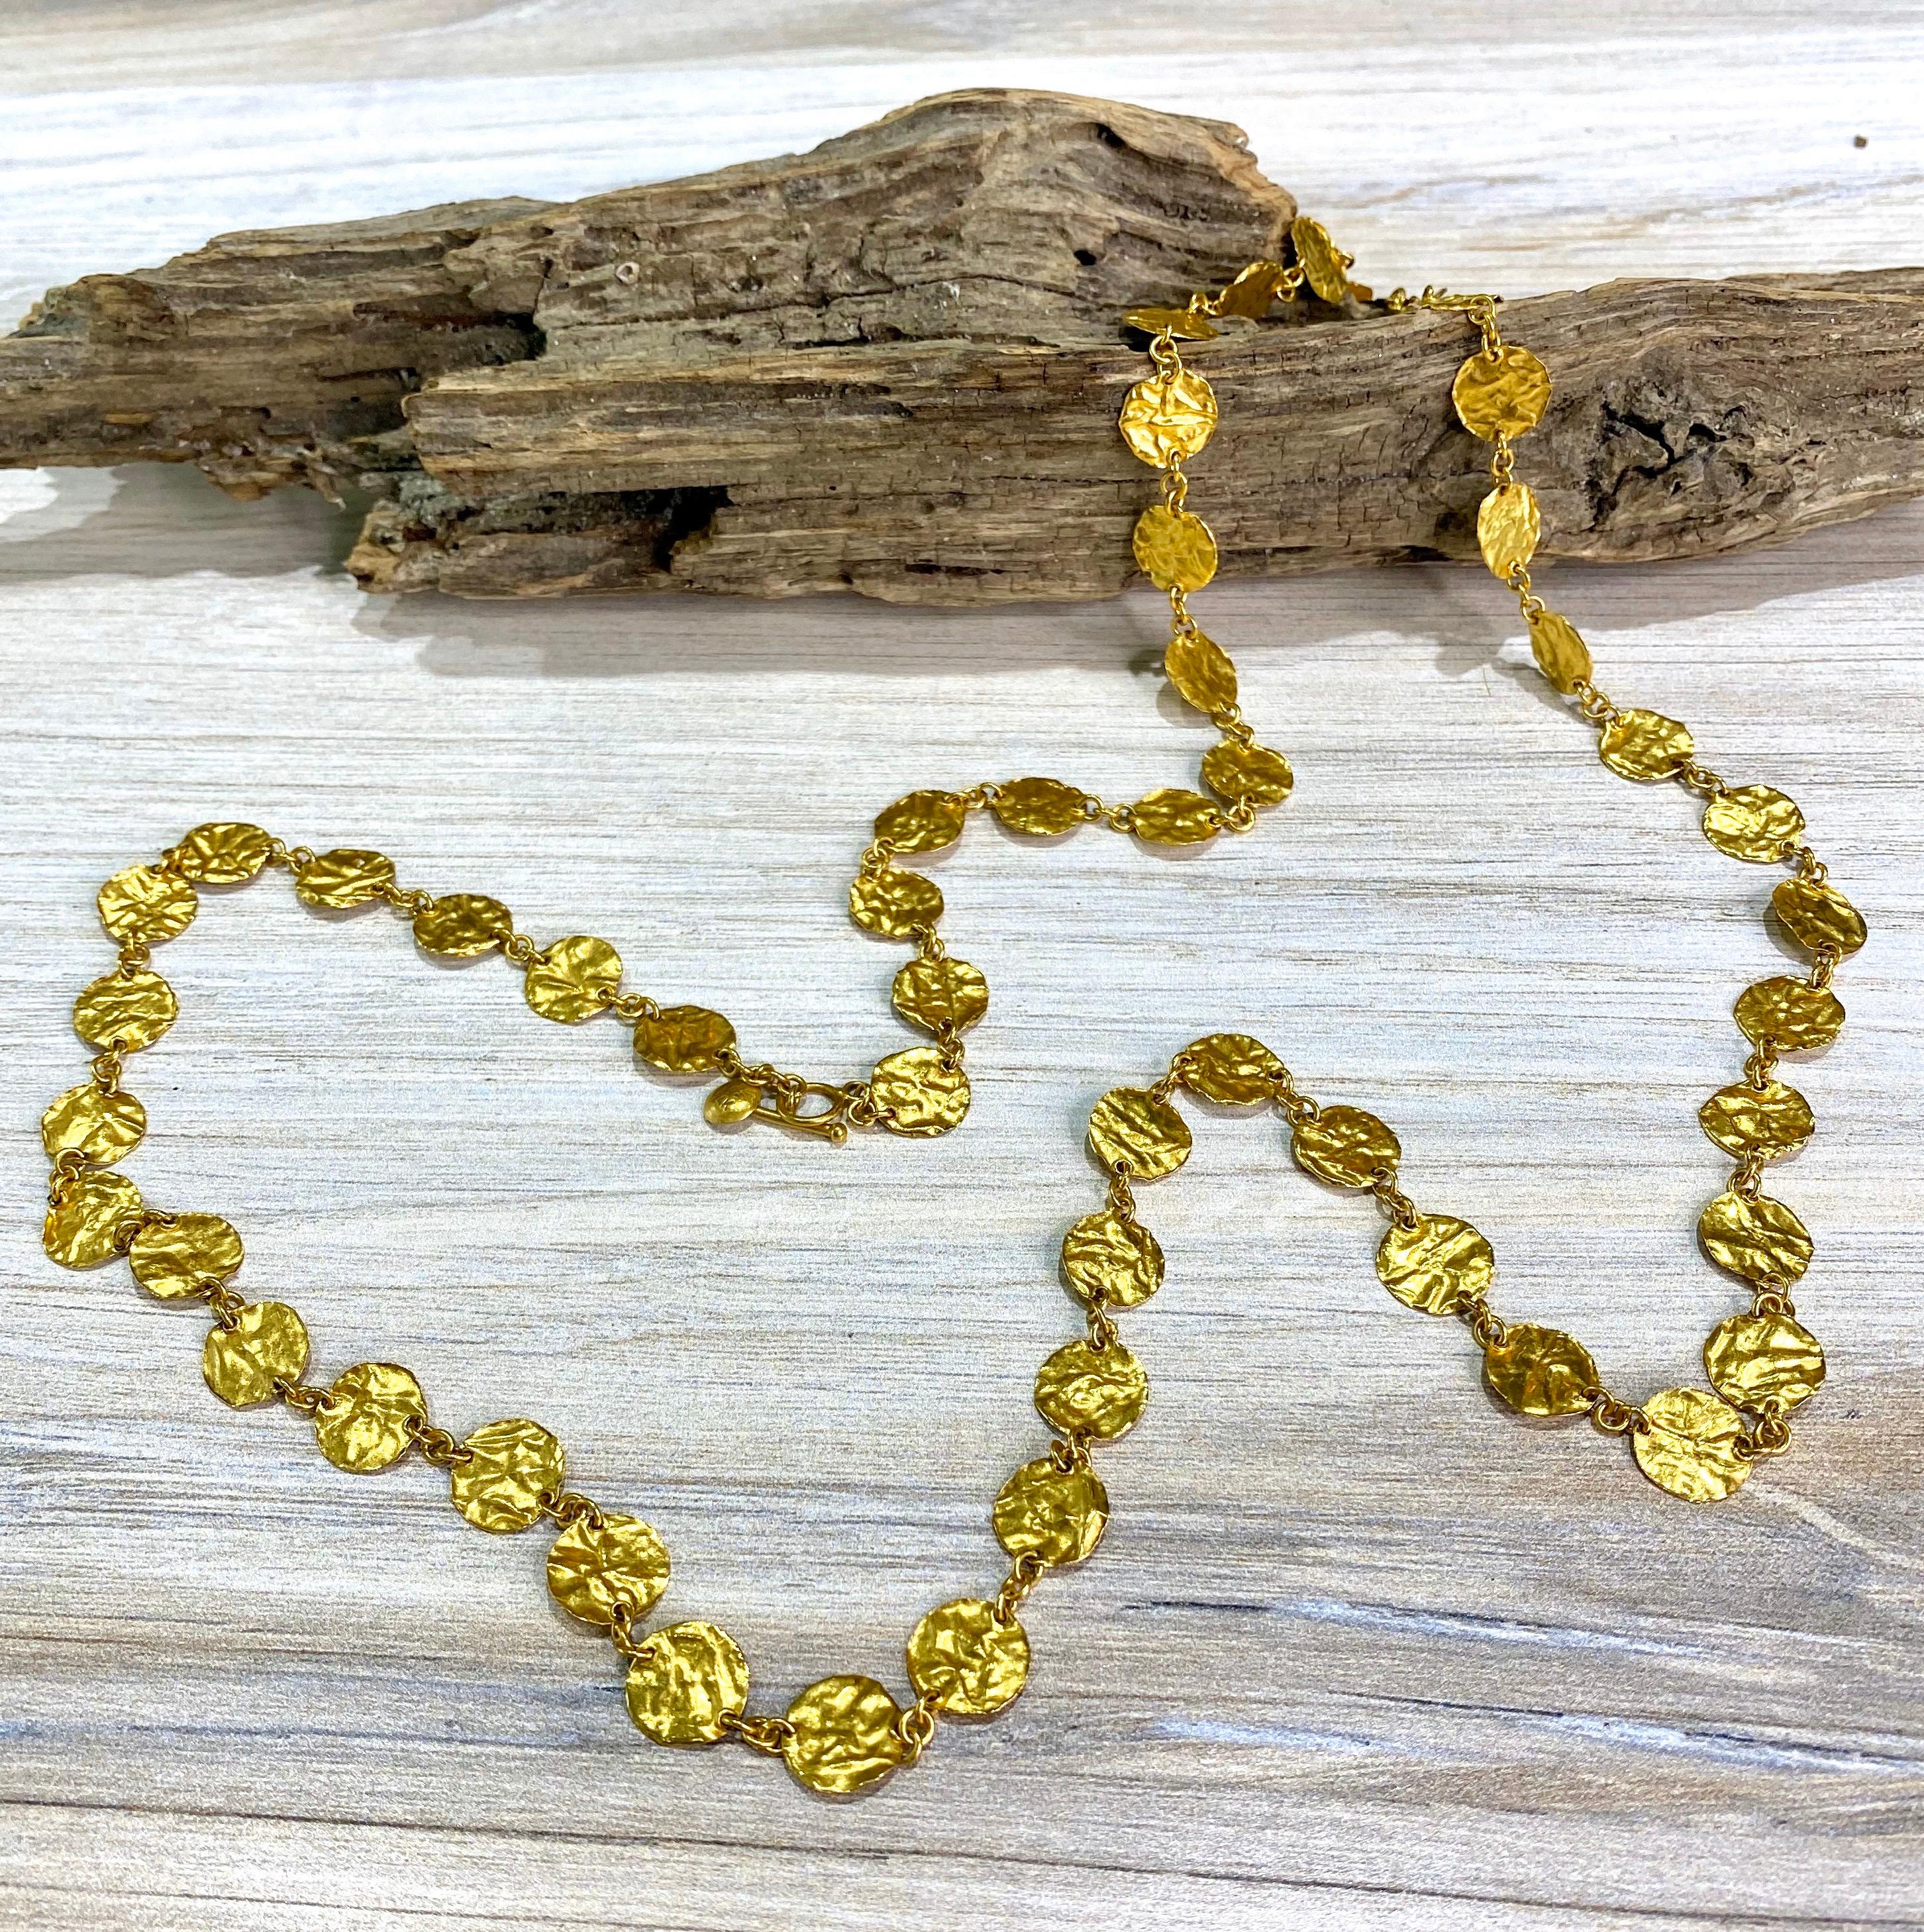 This chain is handcrafted with 24k pure yellow gold sheets, 